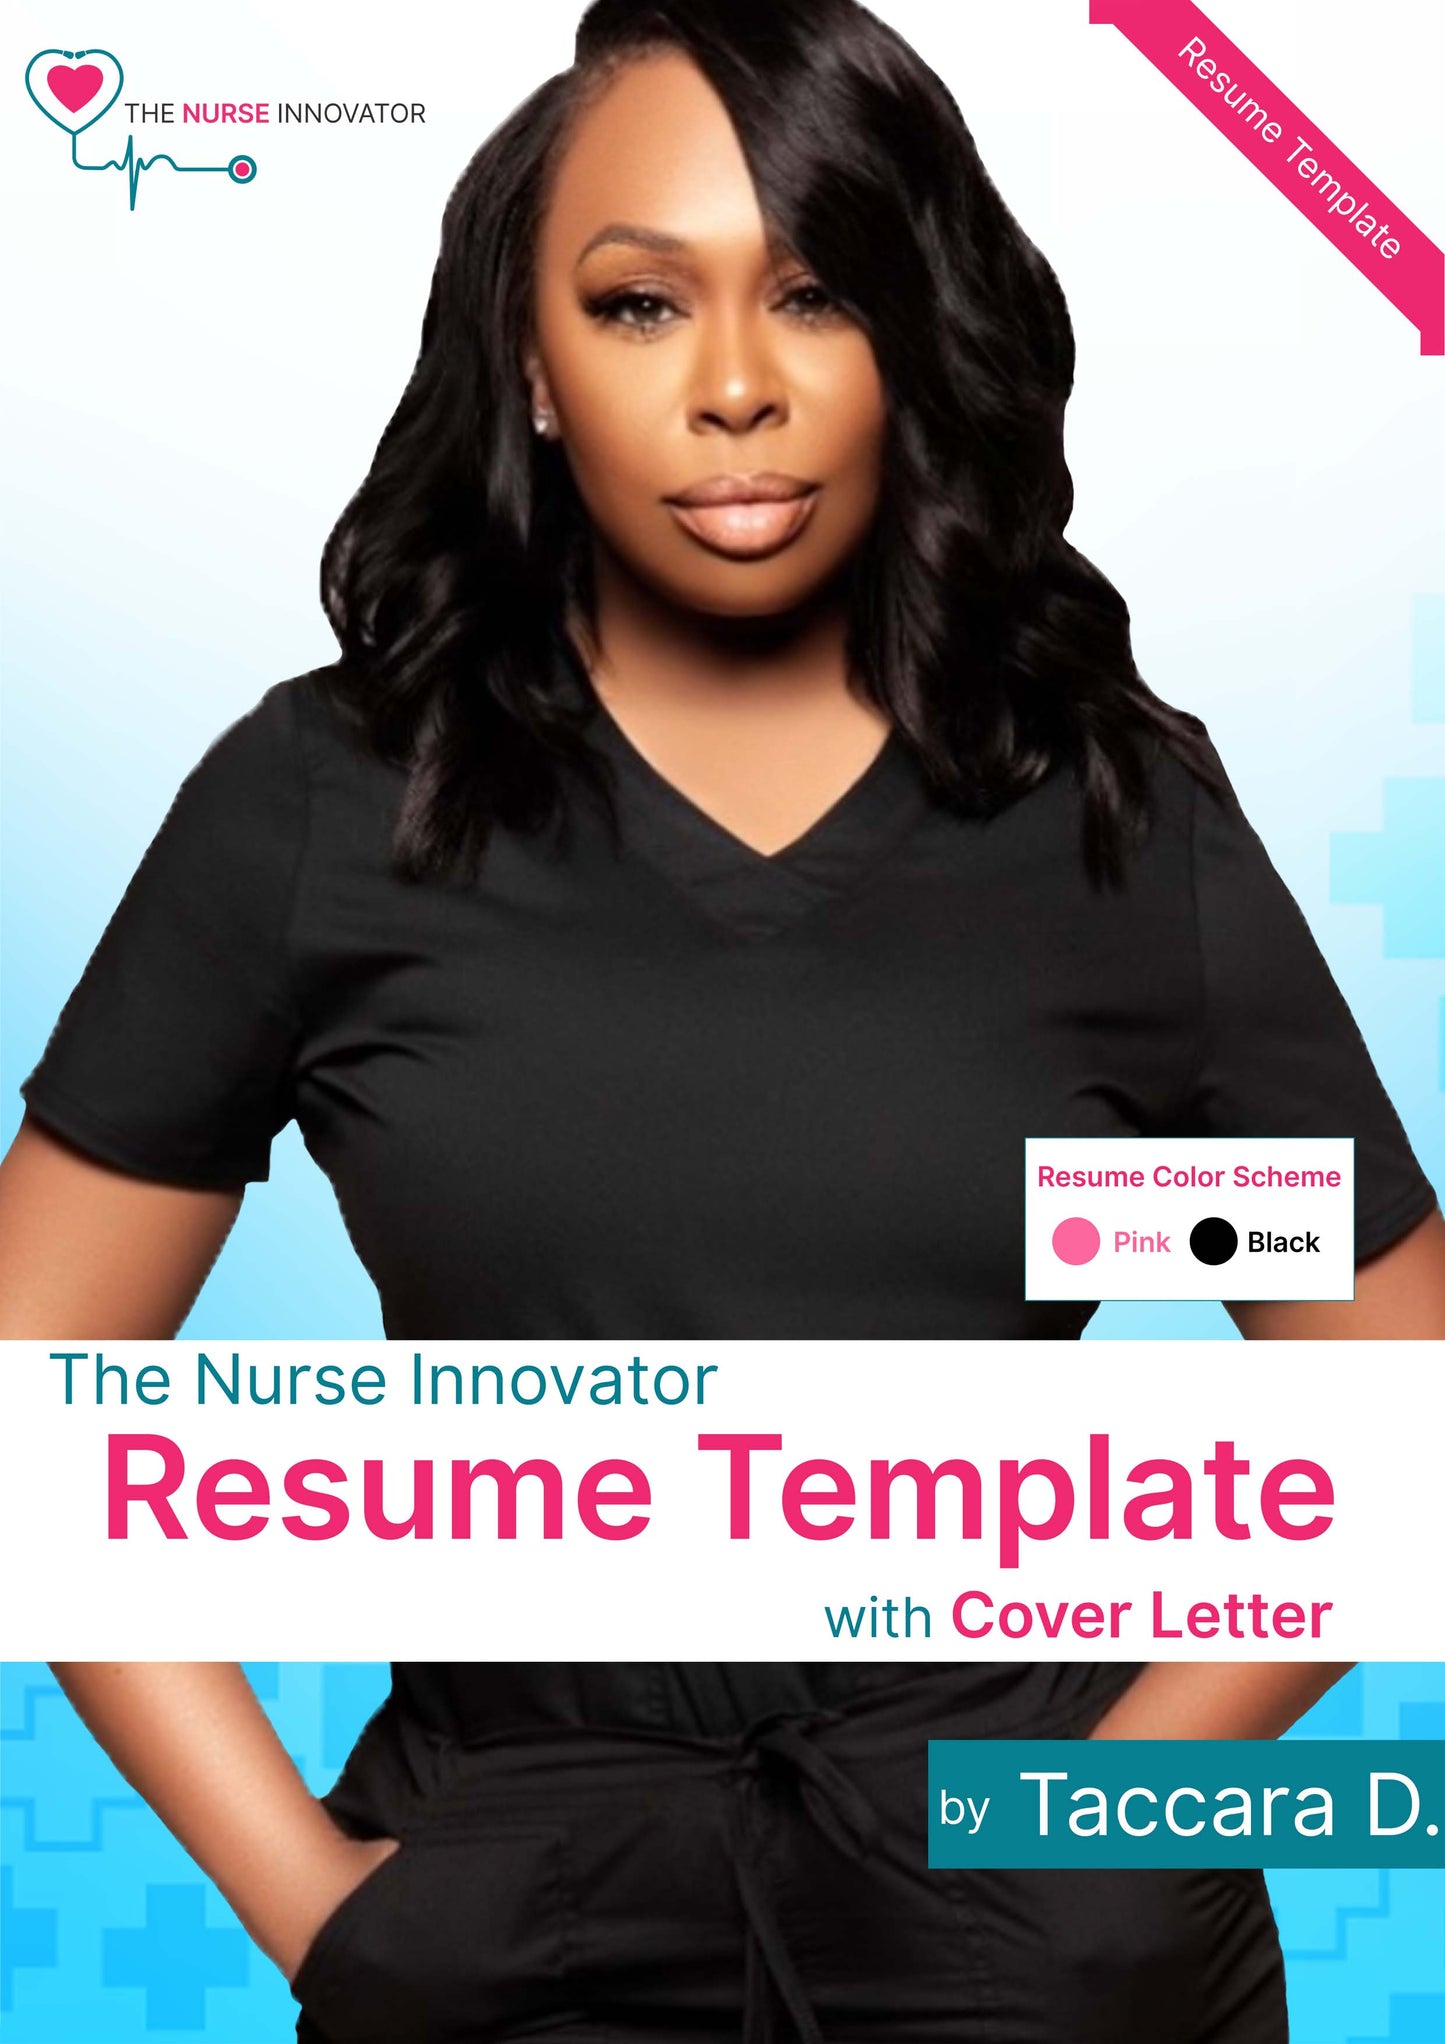 The Nurse Innovator Resume Template with Cover Letter - Pink/ Black